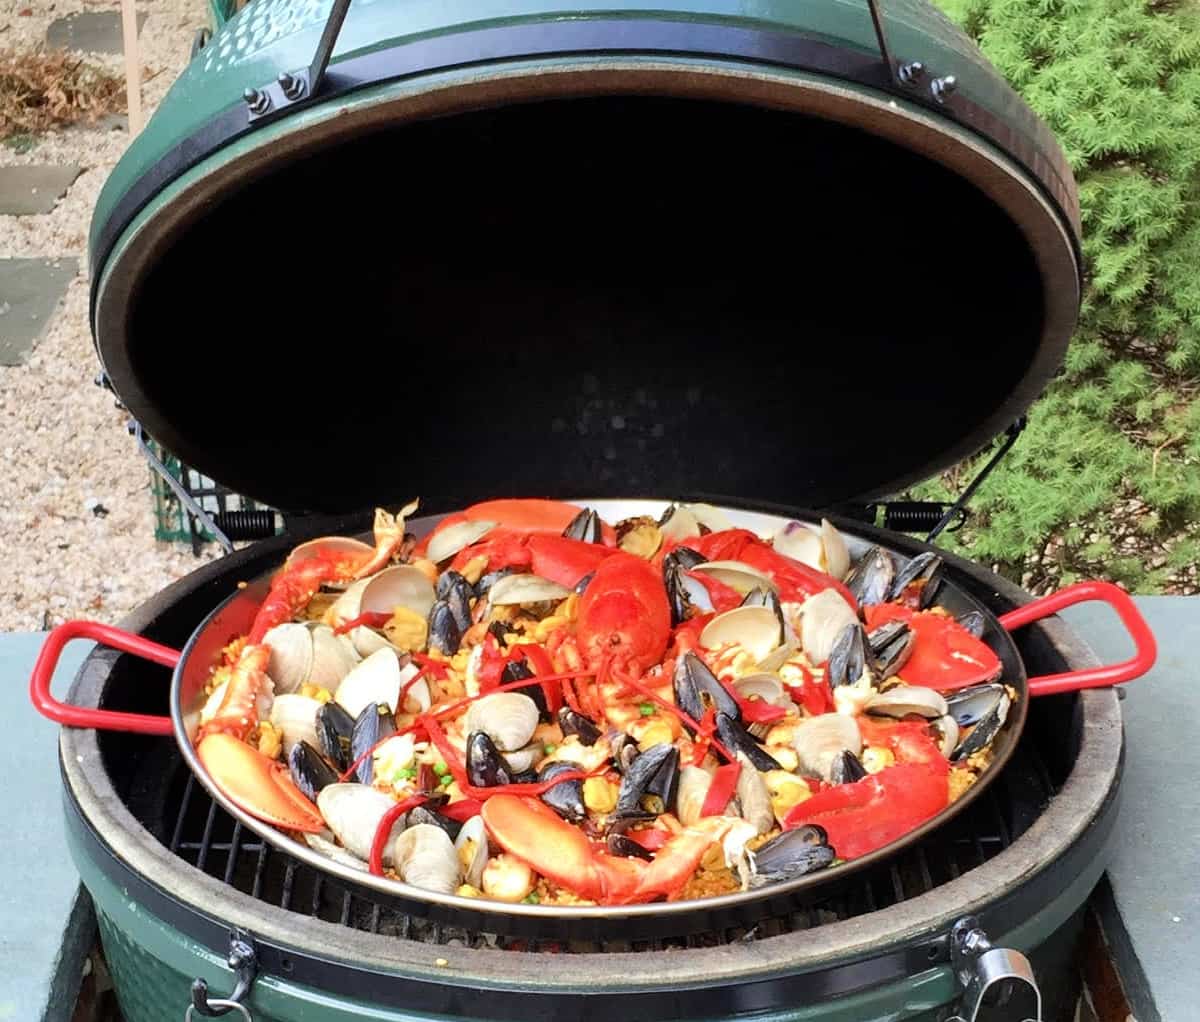 Lobster Paella cooked in a grill